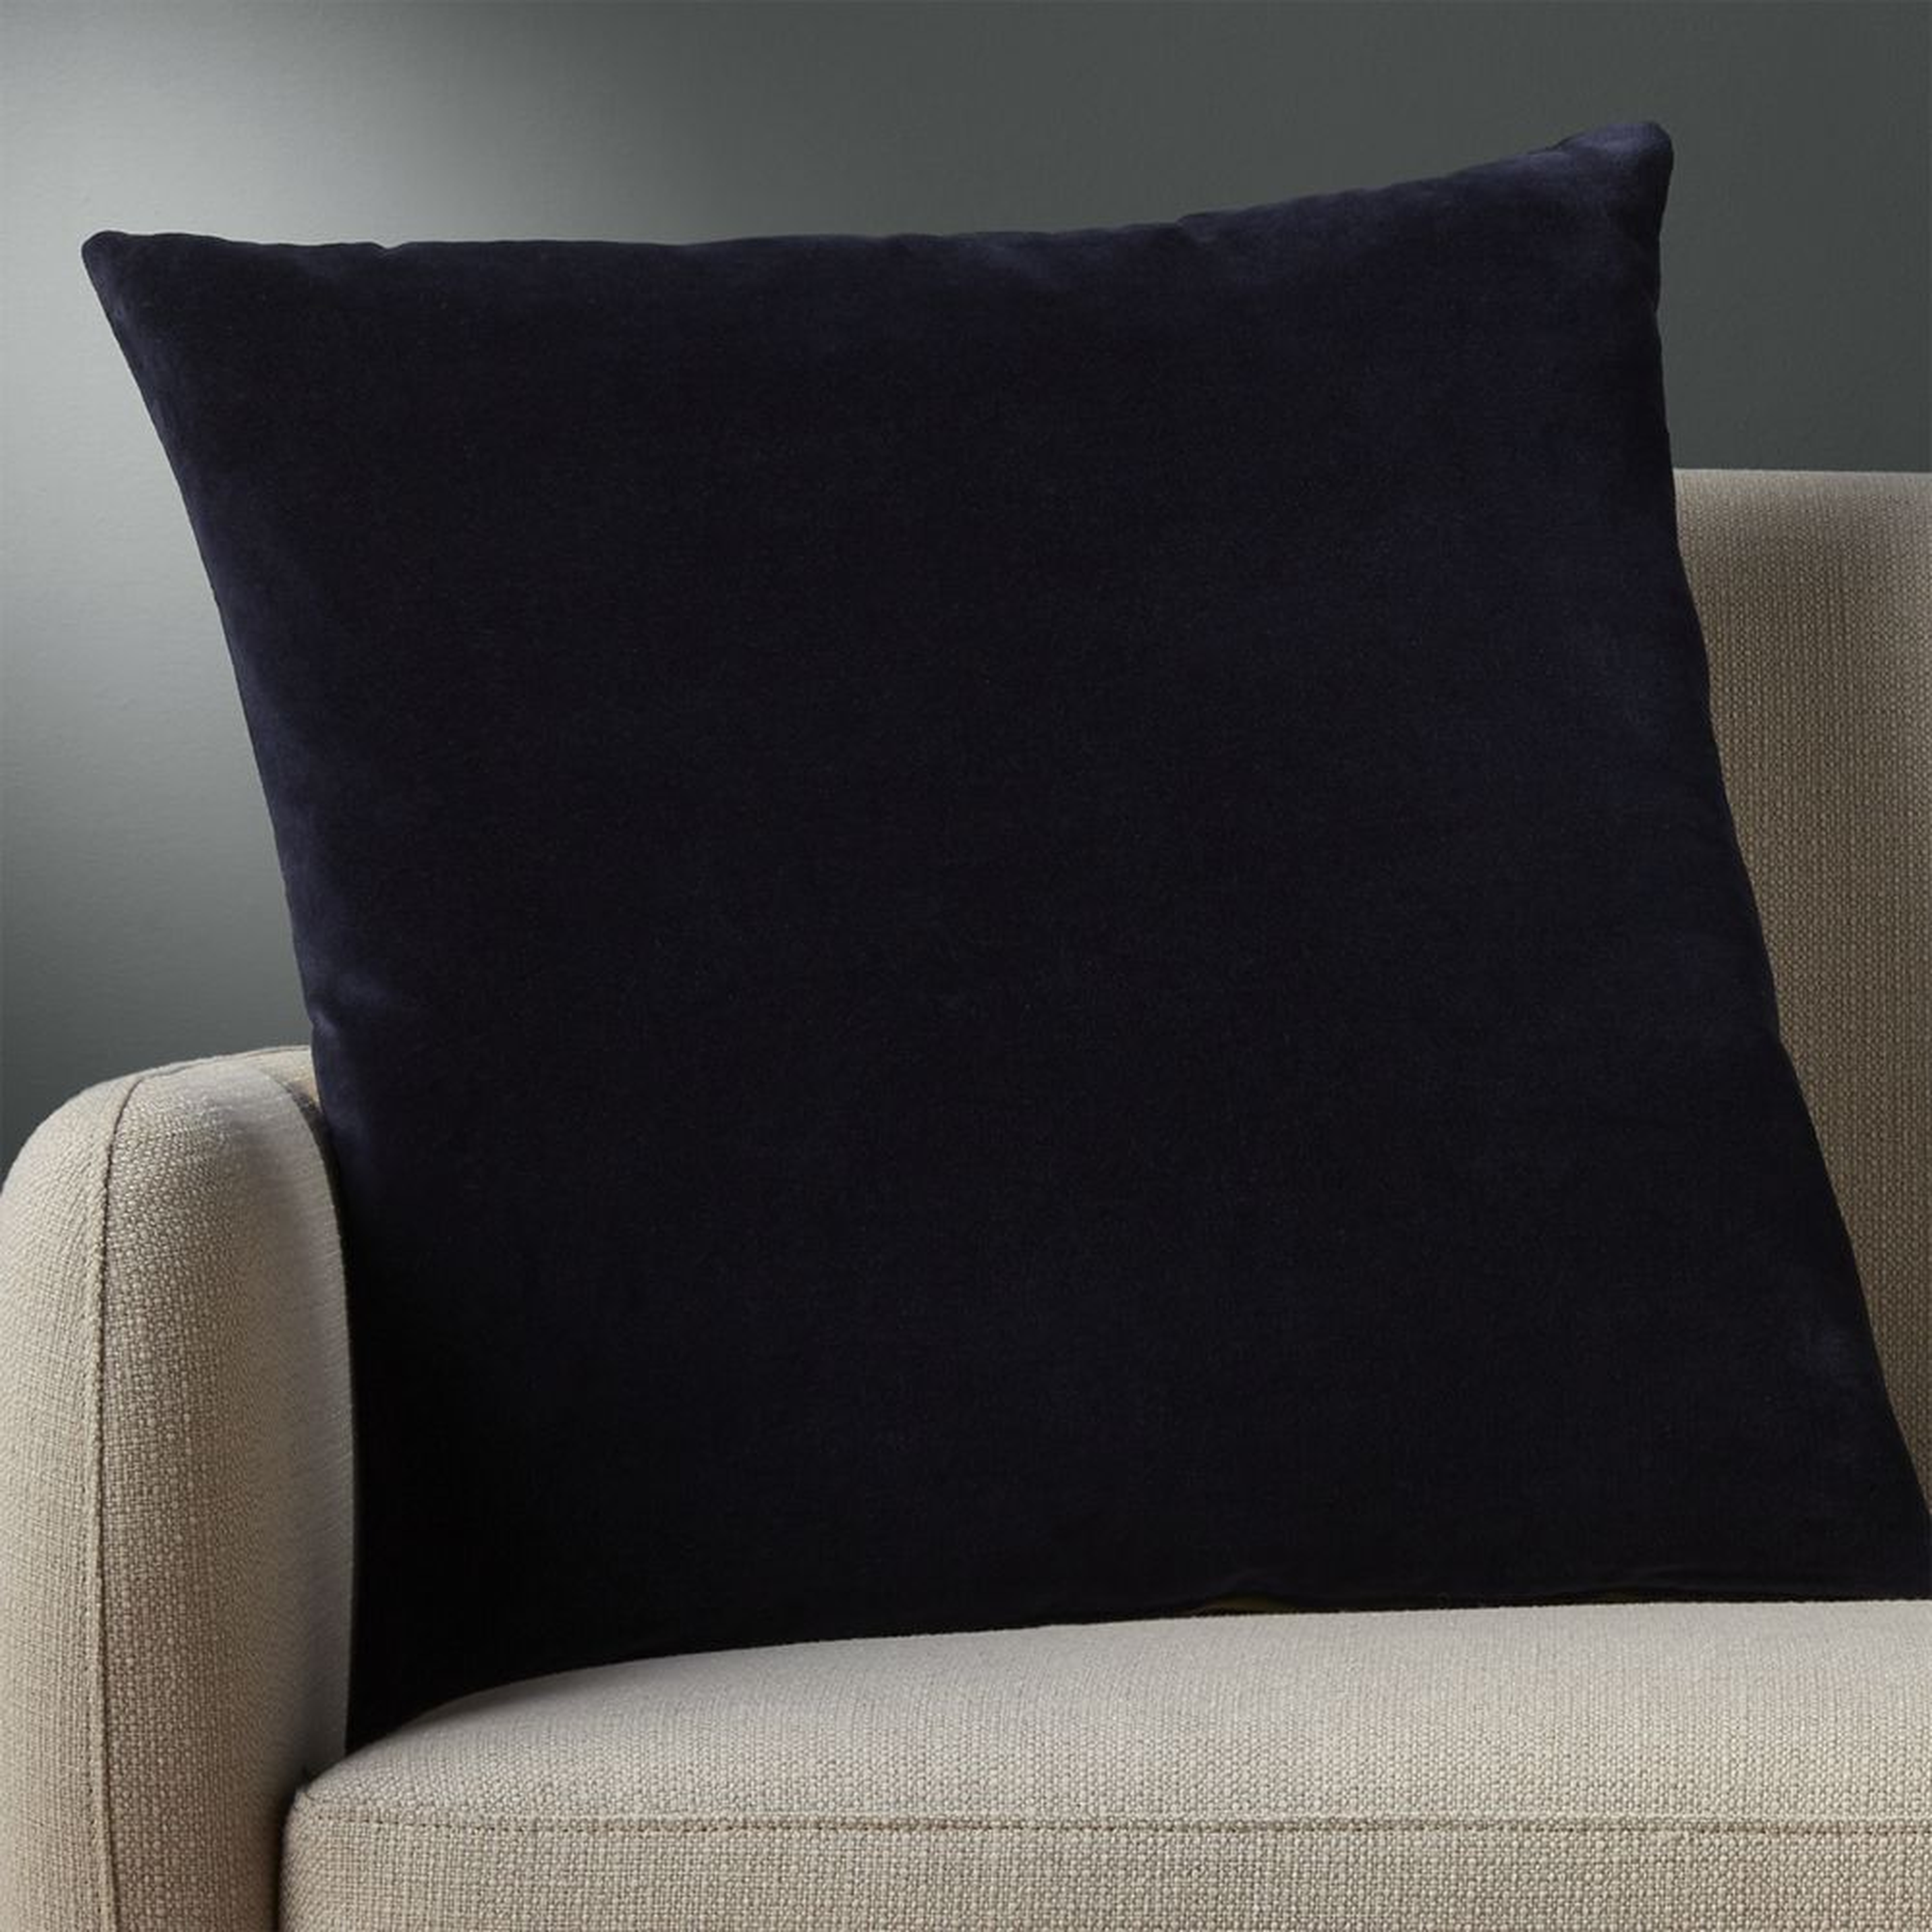 "23"" leisure navy pillow with down-alternative insert" - CB2